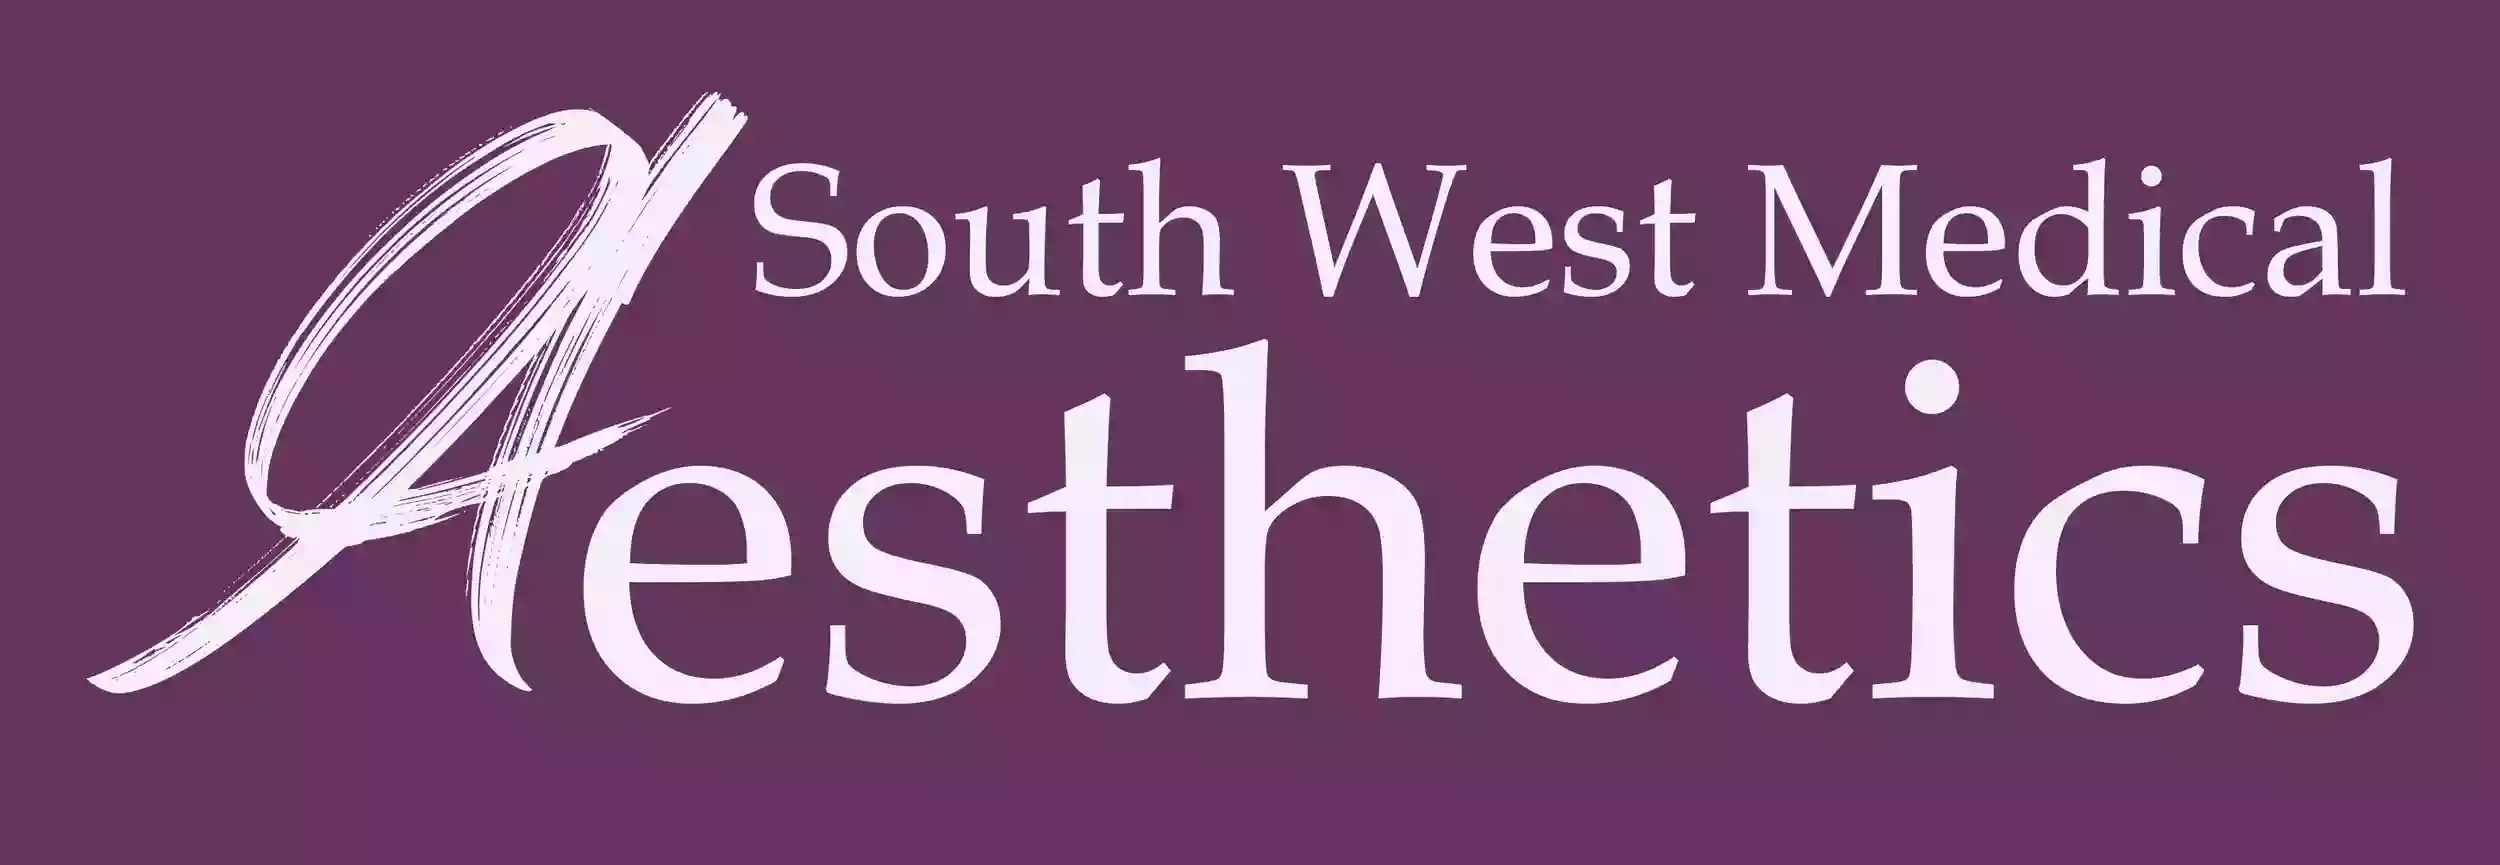 South West Medical Aesthetics